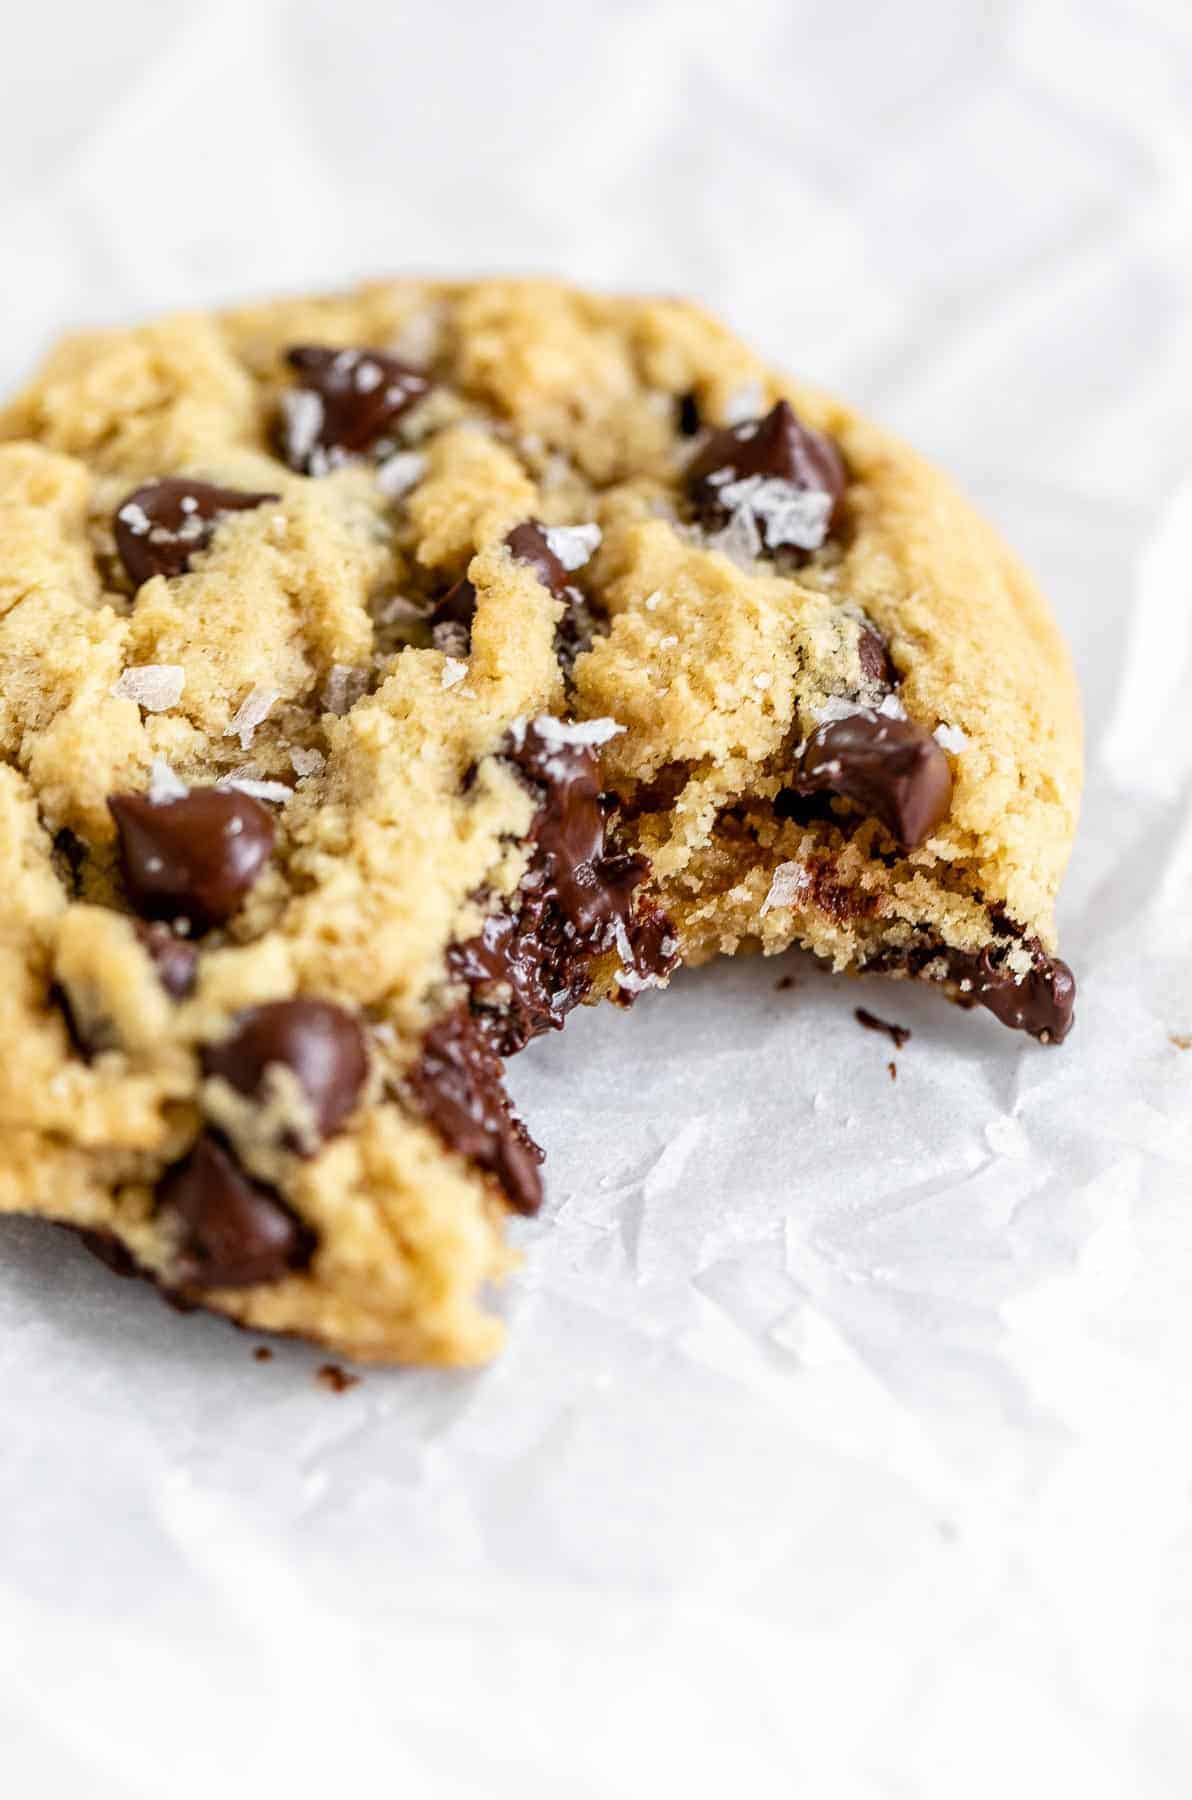 Up close image of the cookie with melted chocolate.